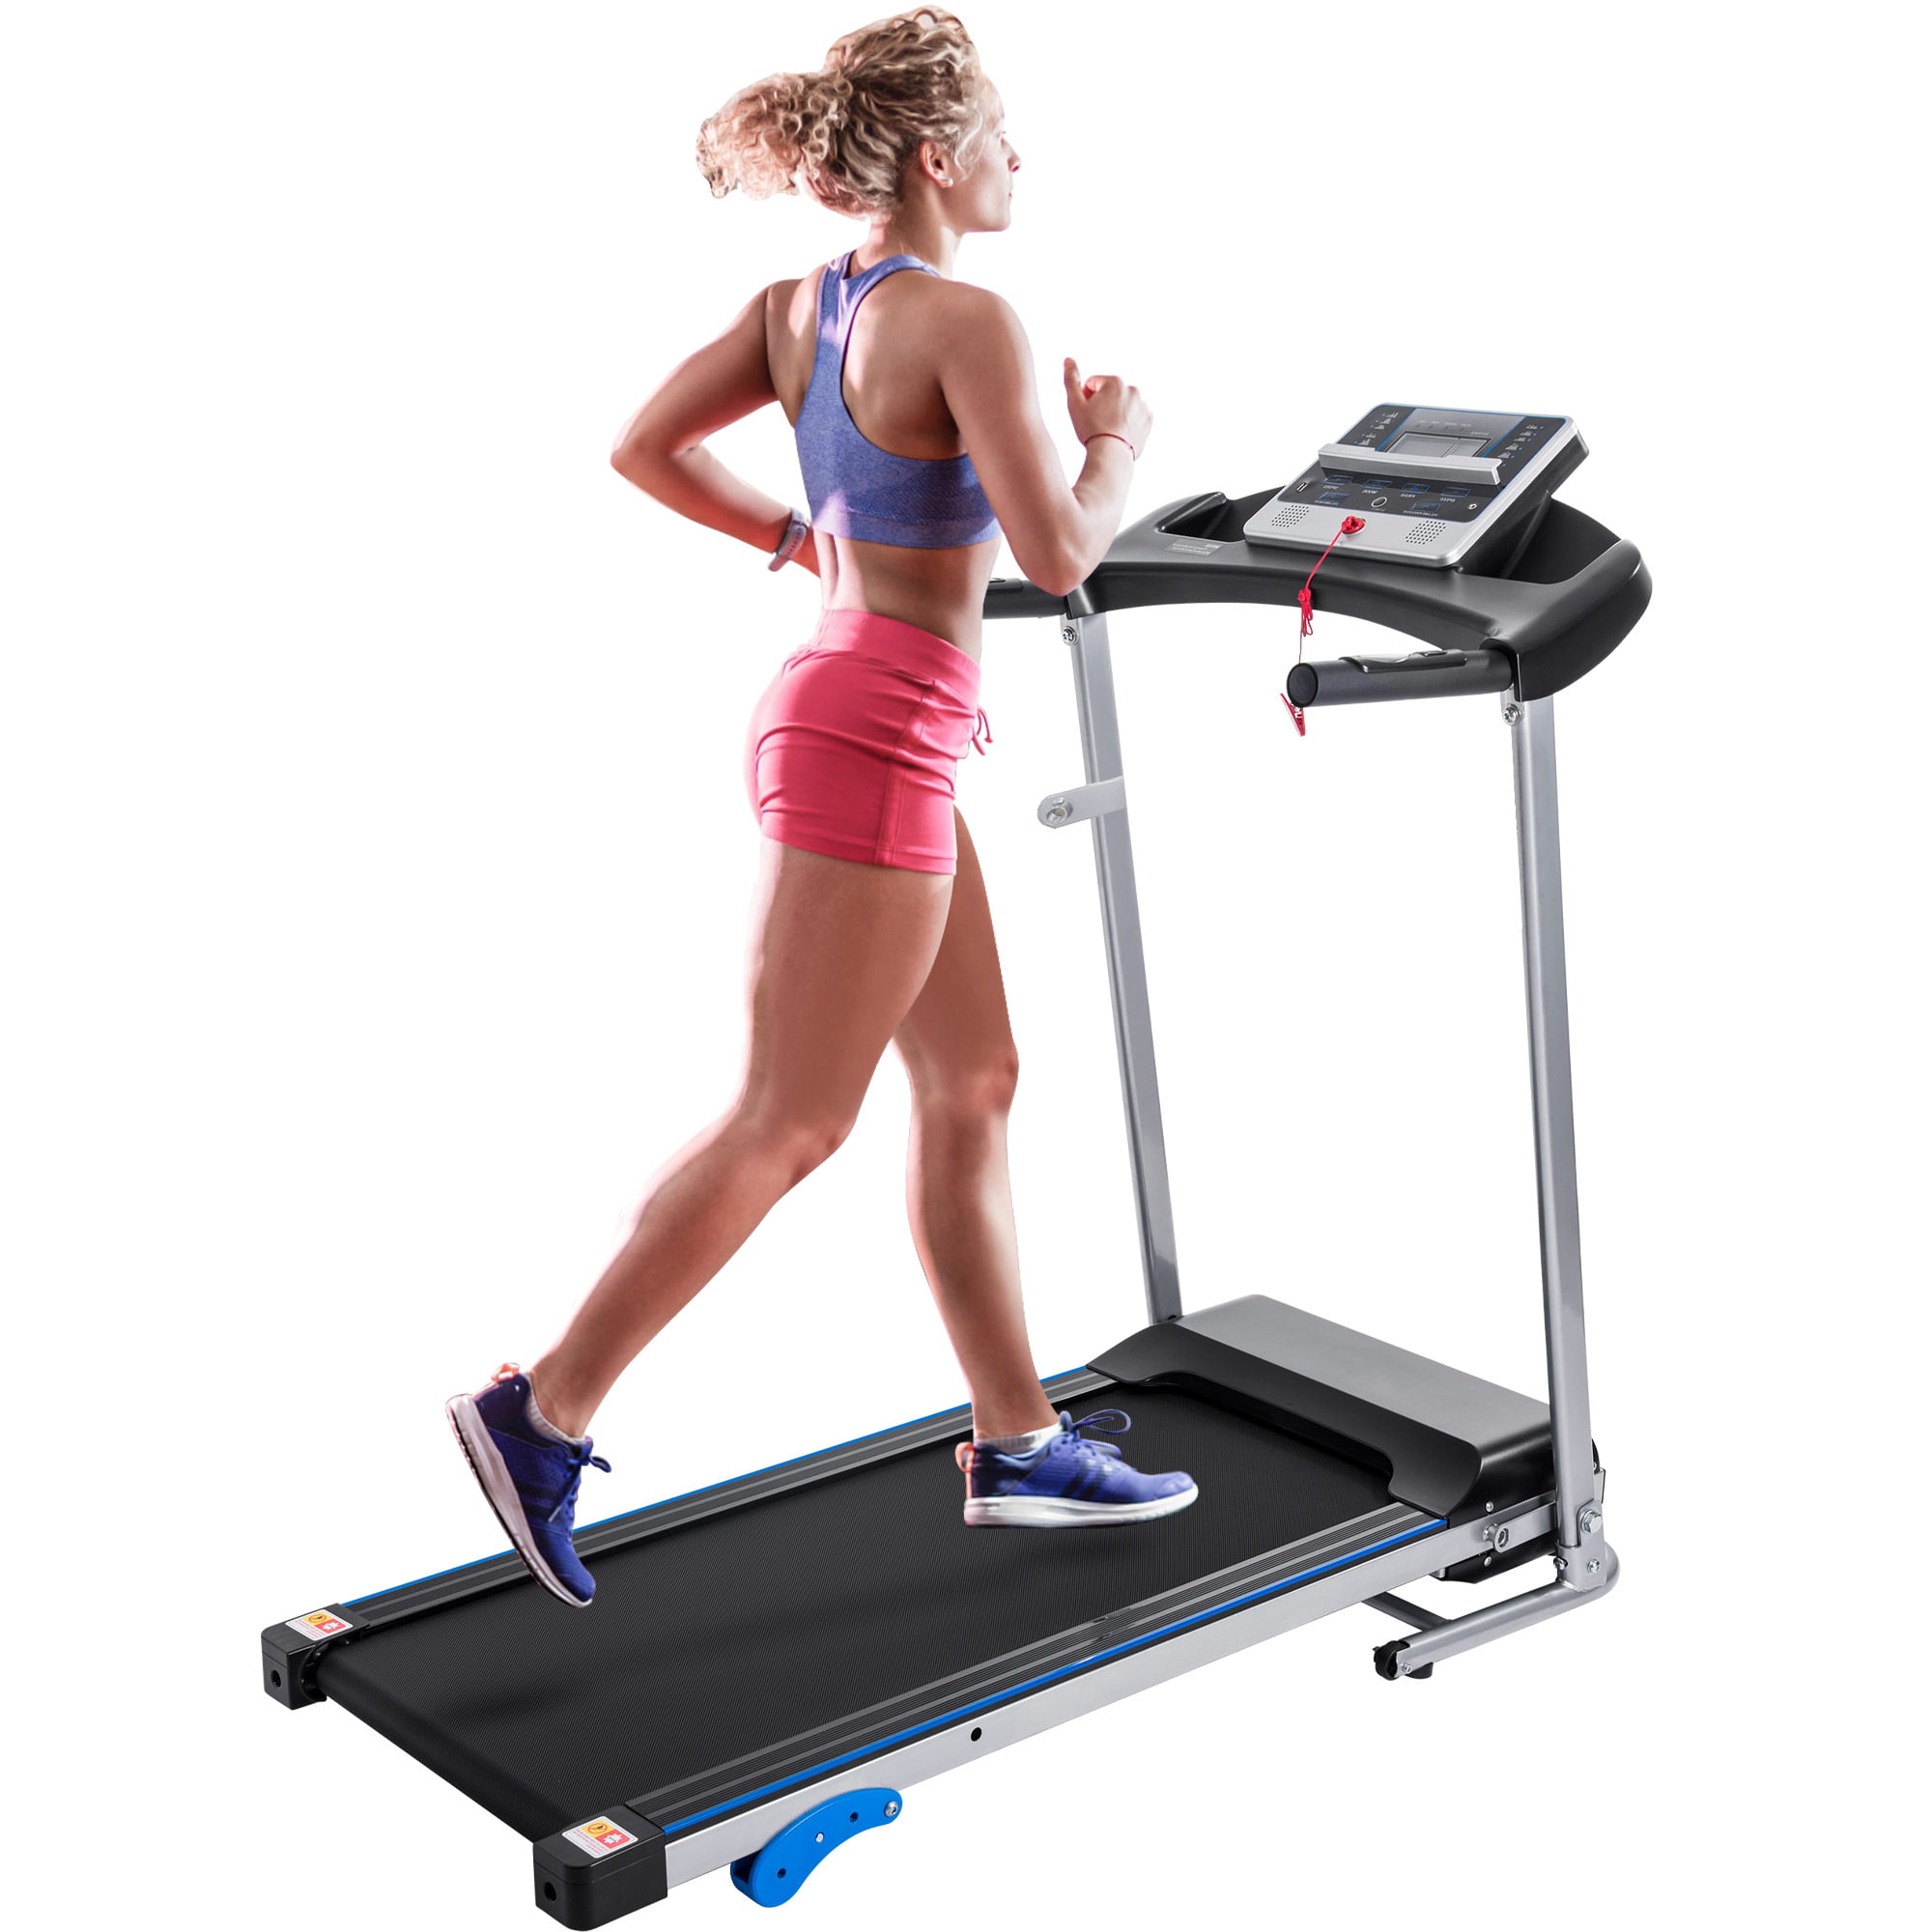 Details about   Home Folding Treadmill Electric Motorized Power Running Jogging Fitness Machine 